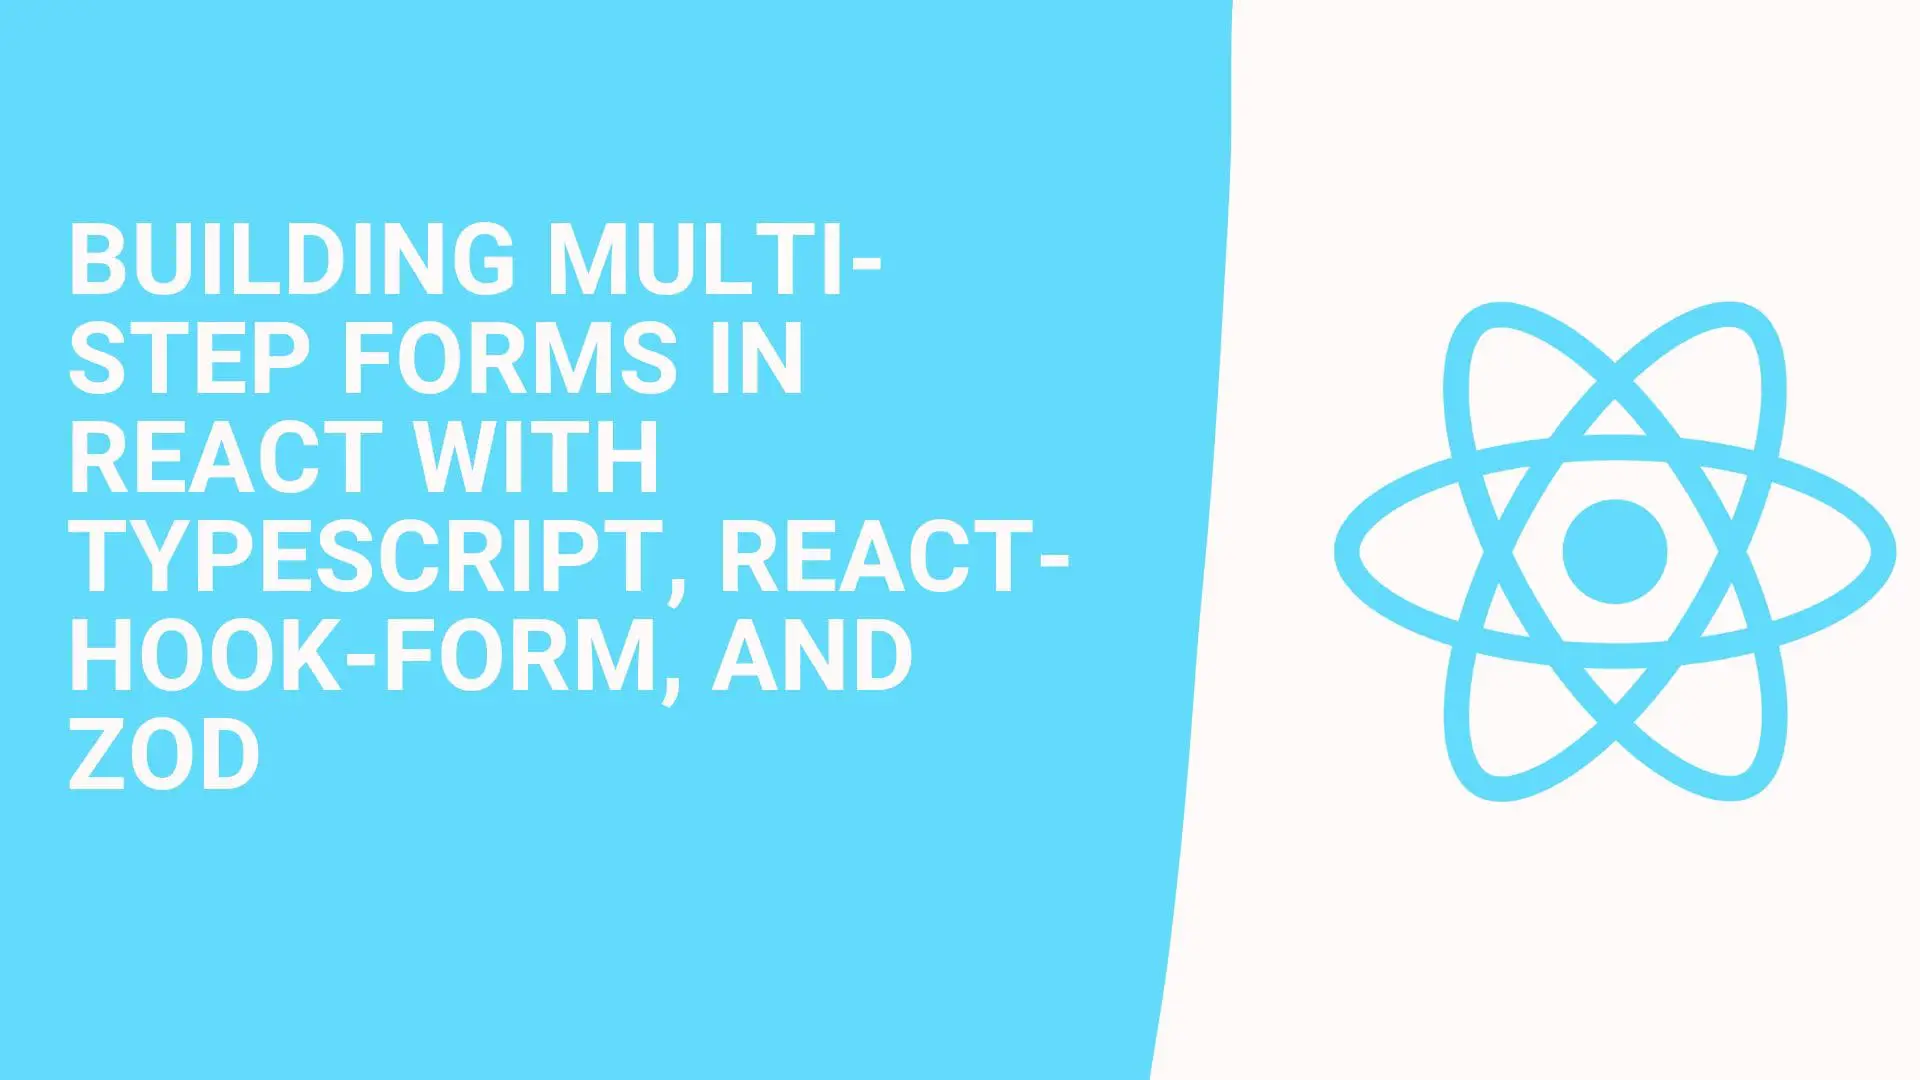 Building Multi-Step Forms in React with TypeScript, React-Hook-Form, and Zod